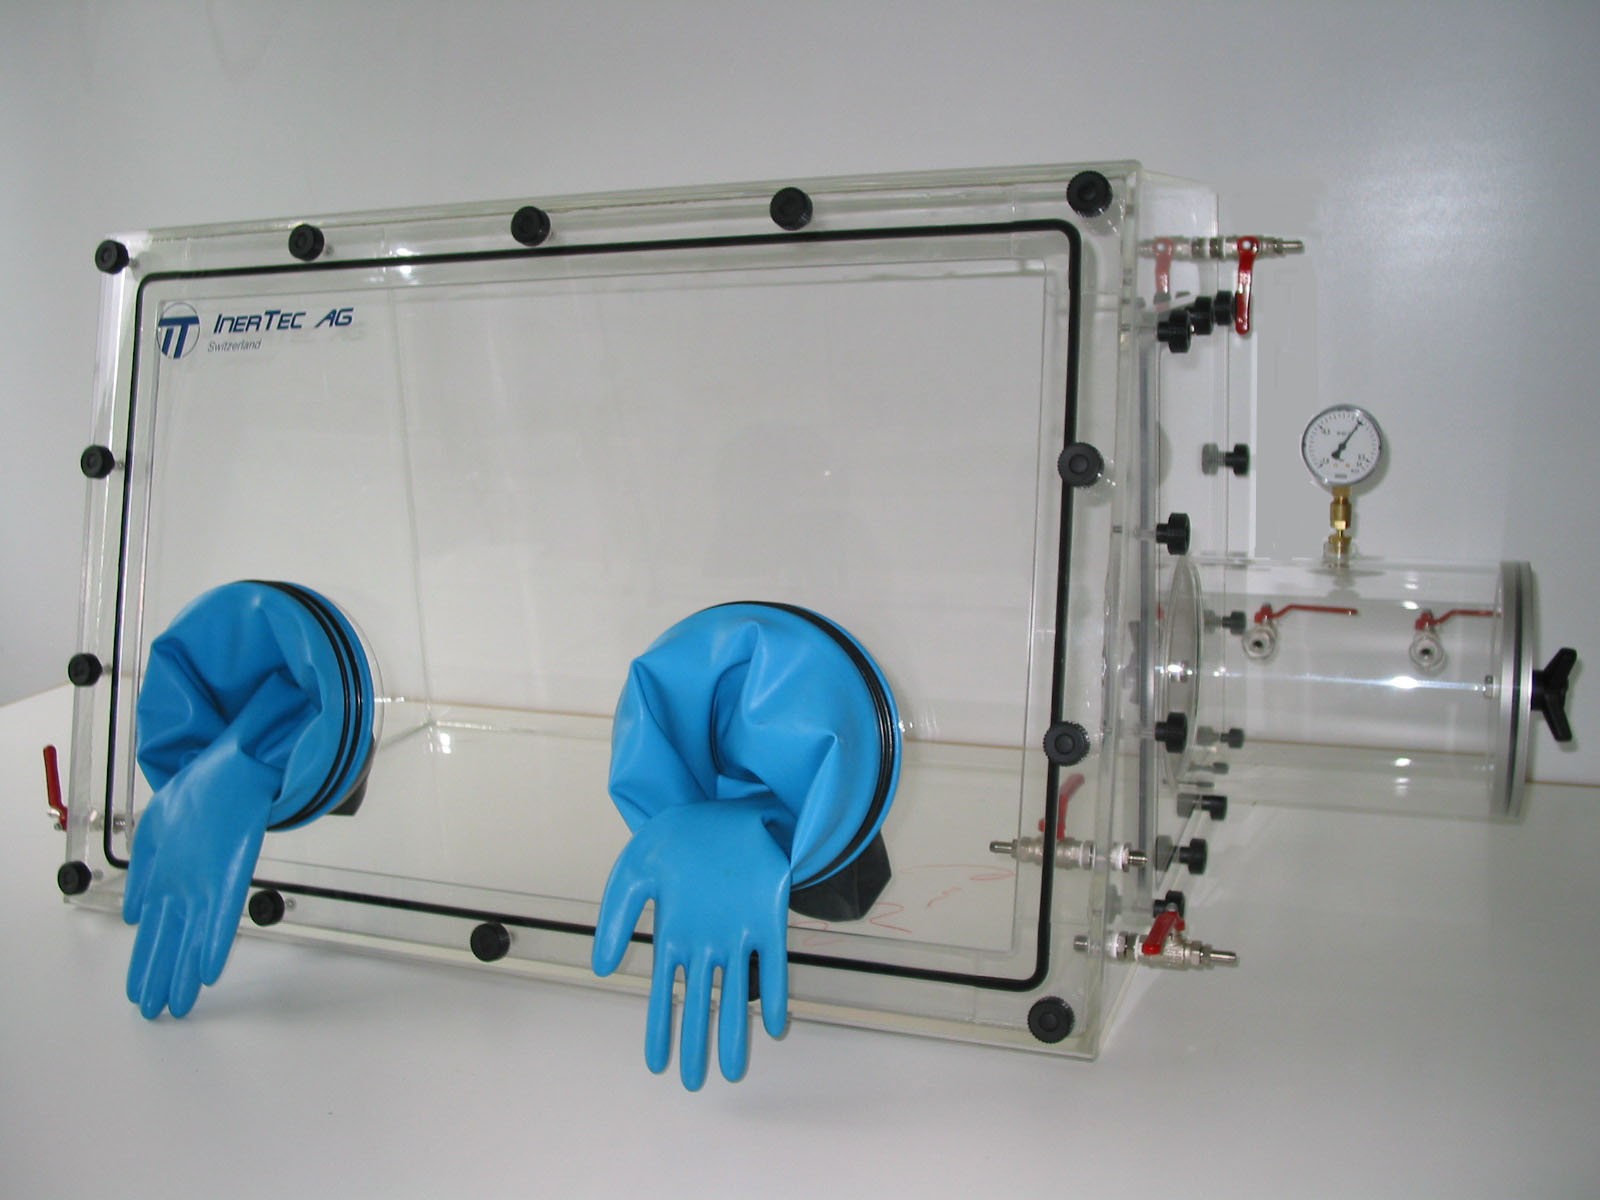 Glovebox made of acrylic&gt; Gas filling: automatic flushing with pressure control, front design: removable, side design: round vacuum lock, control: humidity controller with data logger